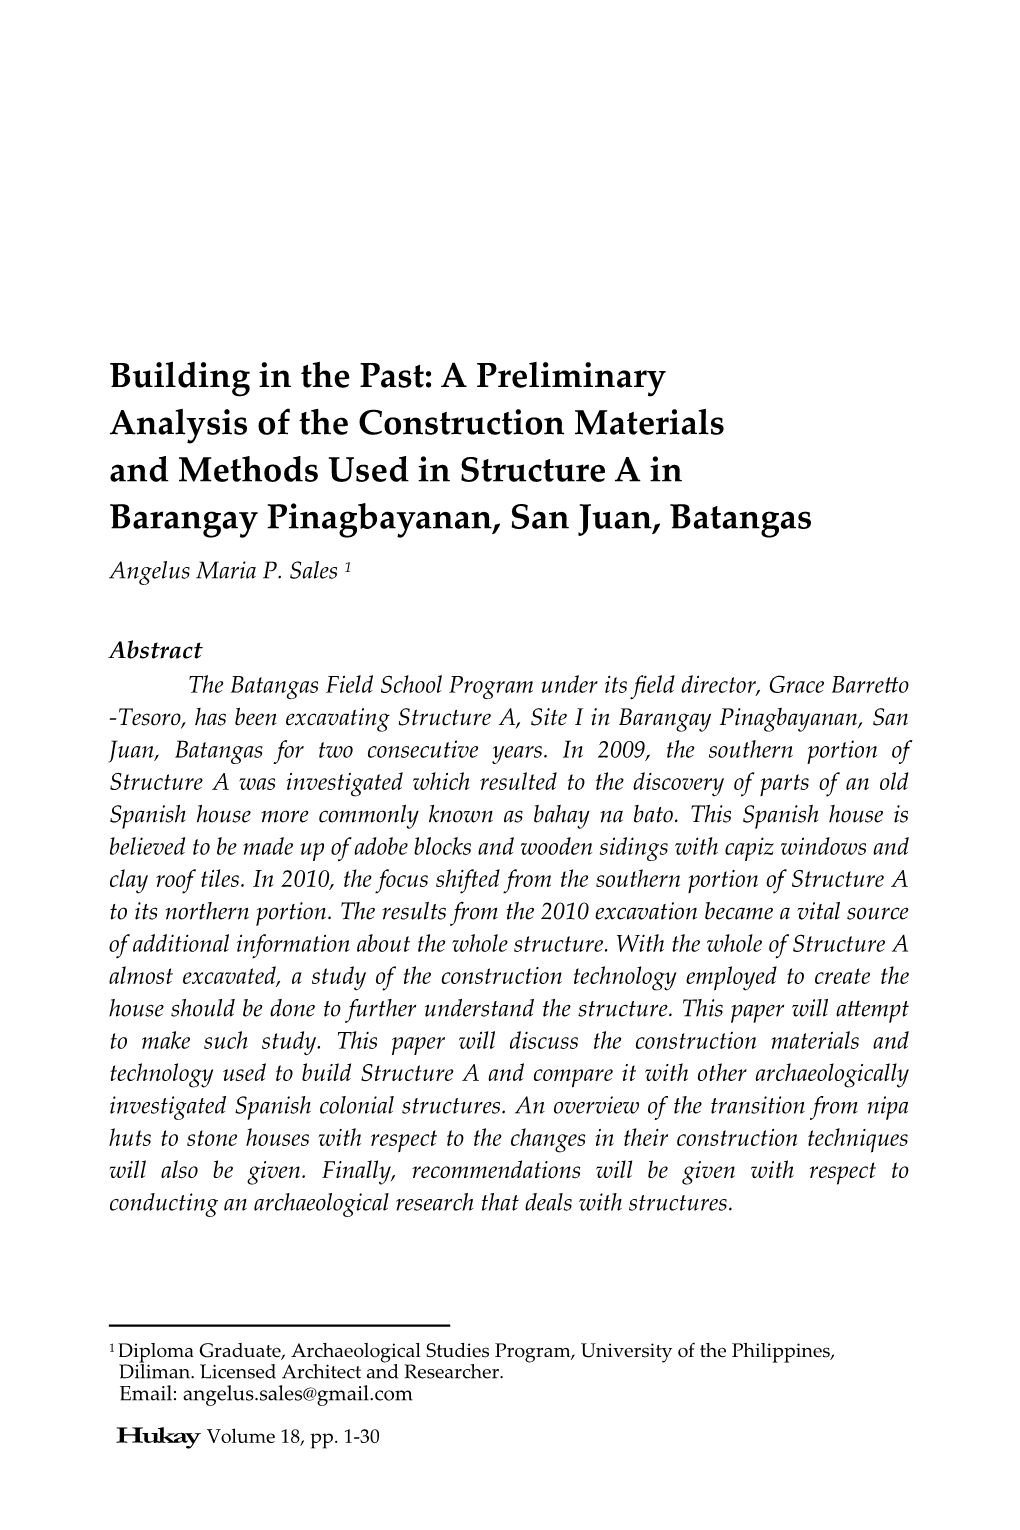 A Preliminary Analysis of the Construction Materials and Methods Used in Structure a in Barangay Pinagbayanan, San Juan, Batangas